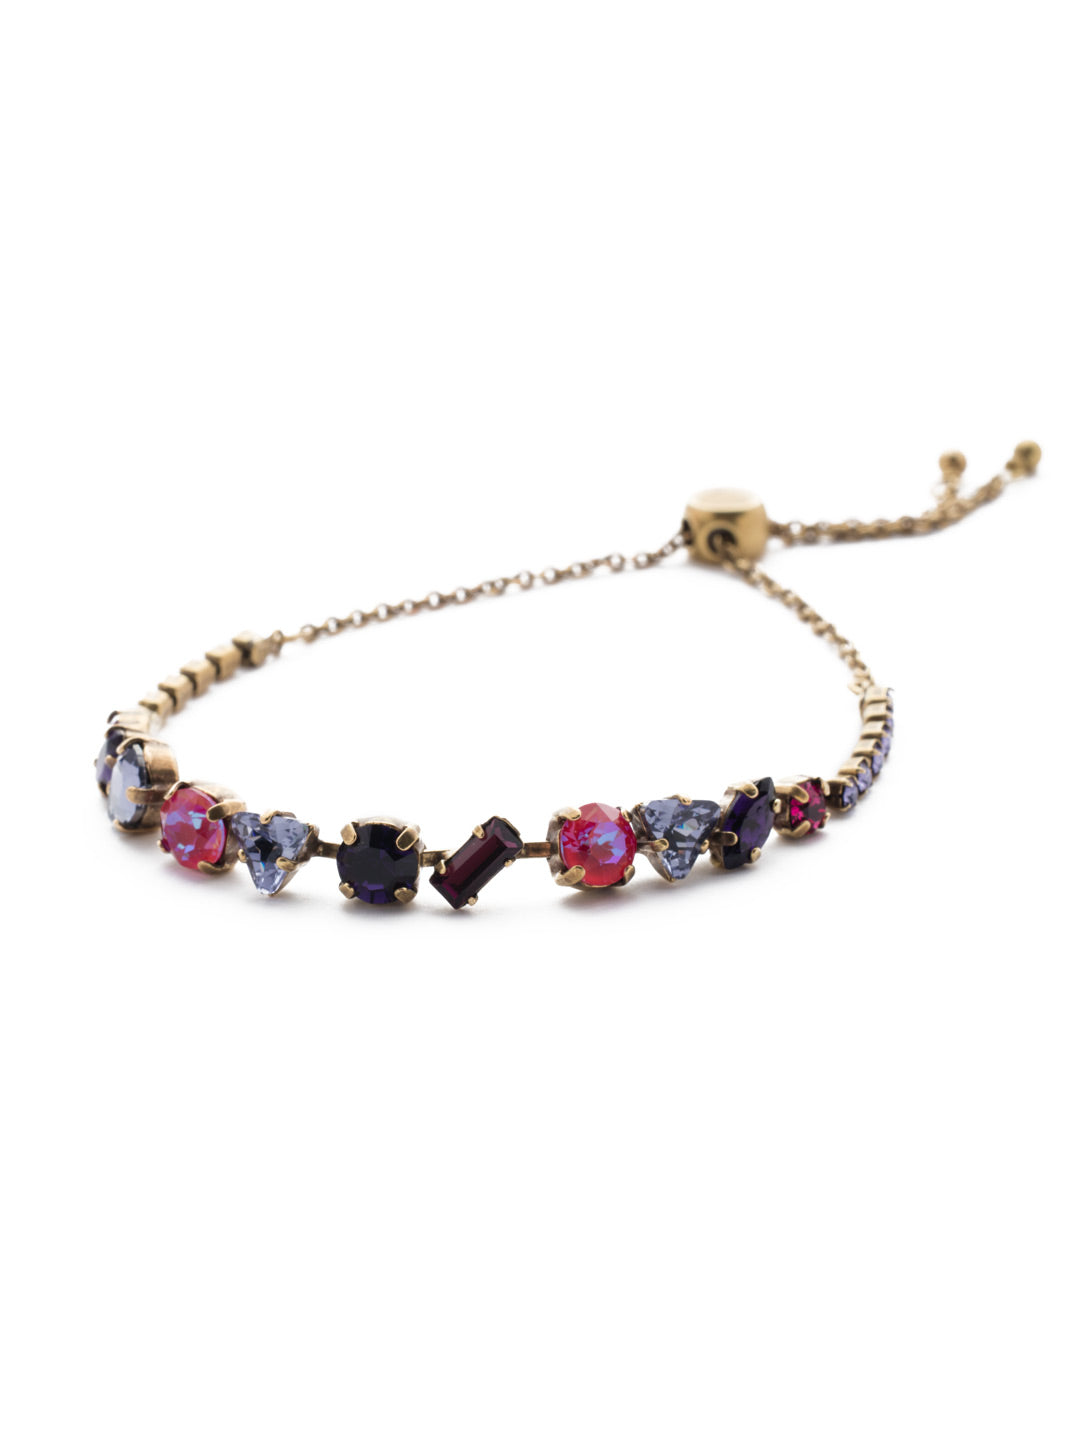 Cherished Slider Bracelet - BEK19AGDCS - One shape doesn't have to fit all. Go for versatility with crystals of all kinds in a slider you can match to any outfit. Slider bracelet closure. From Sorrelli's Duchess collection in our Antique Gold-tone finish.